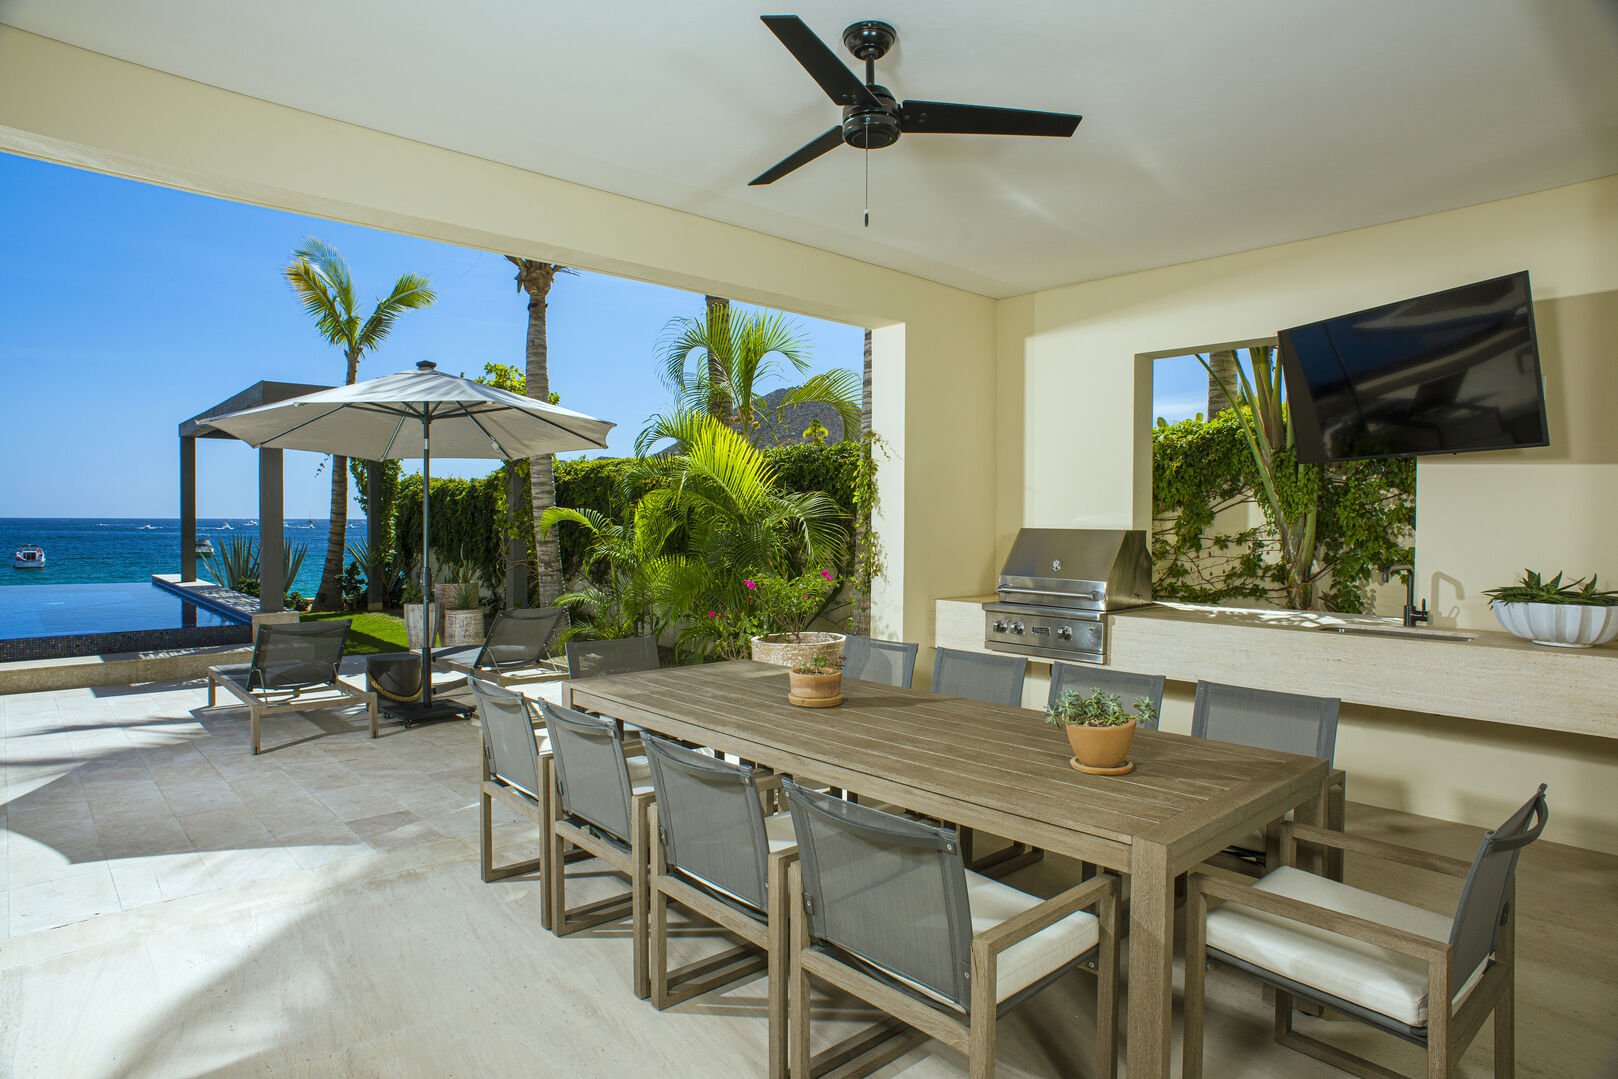 EXTERIOR DINNING ROOM WITH TV SOUND AND BBQ GRILL